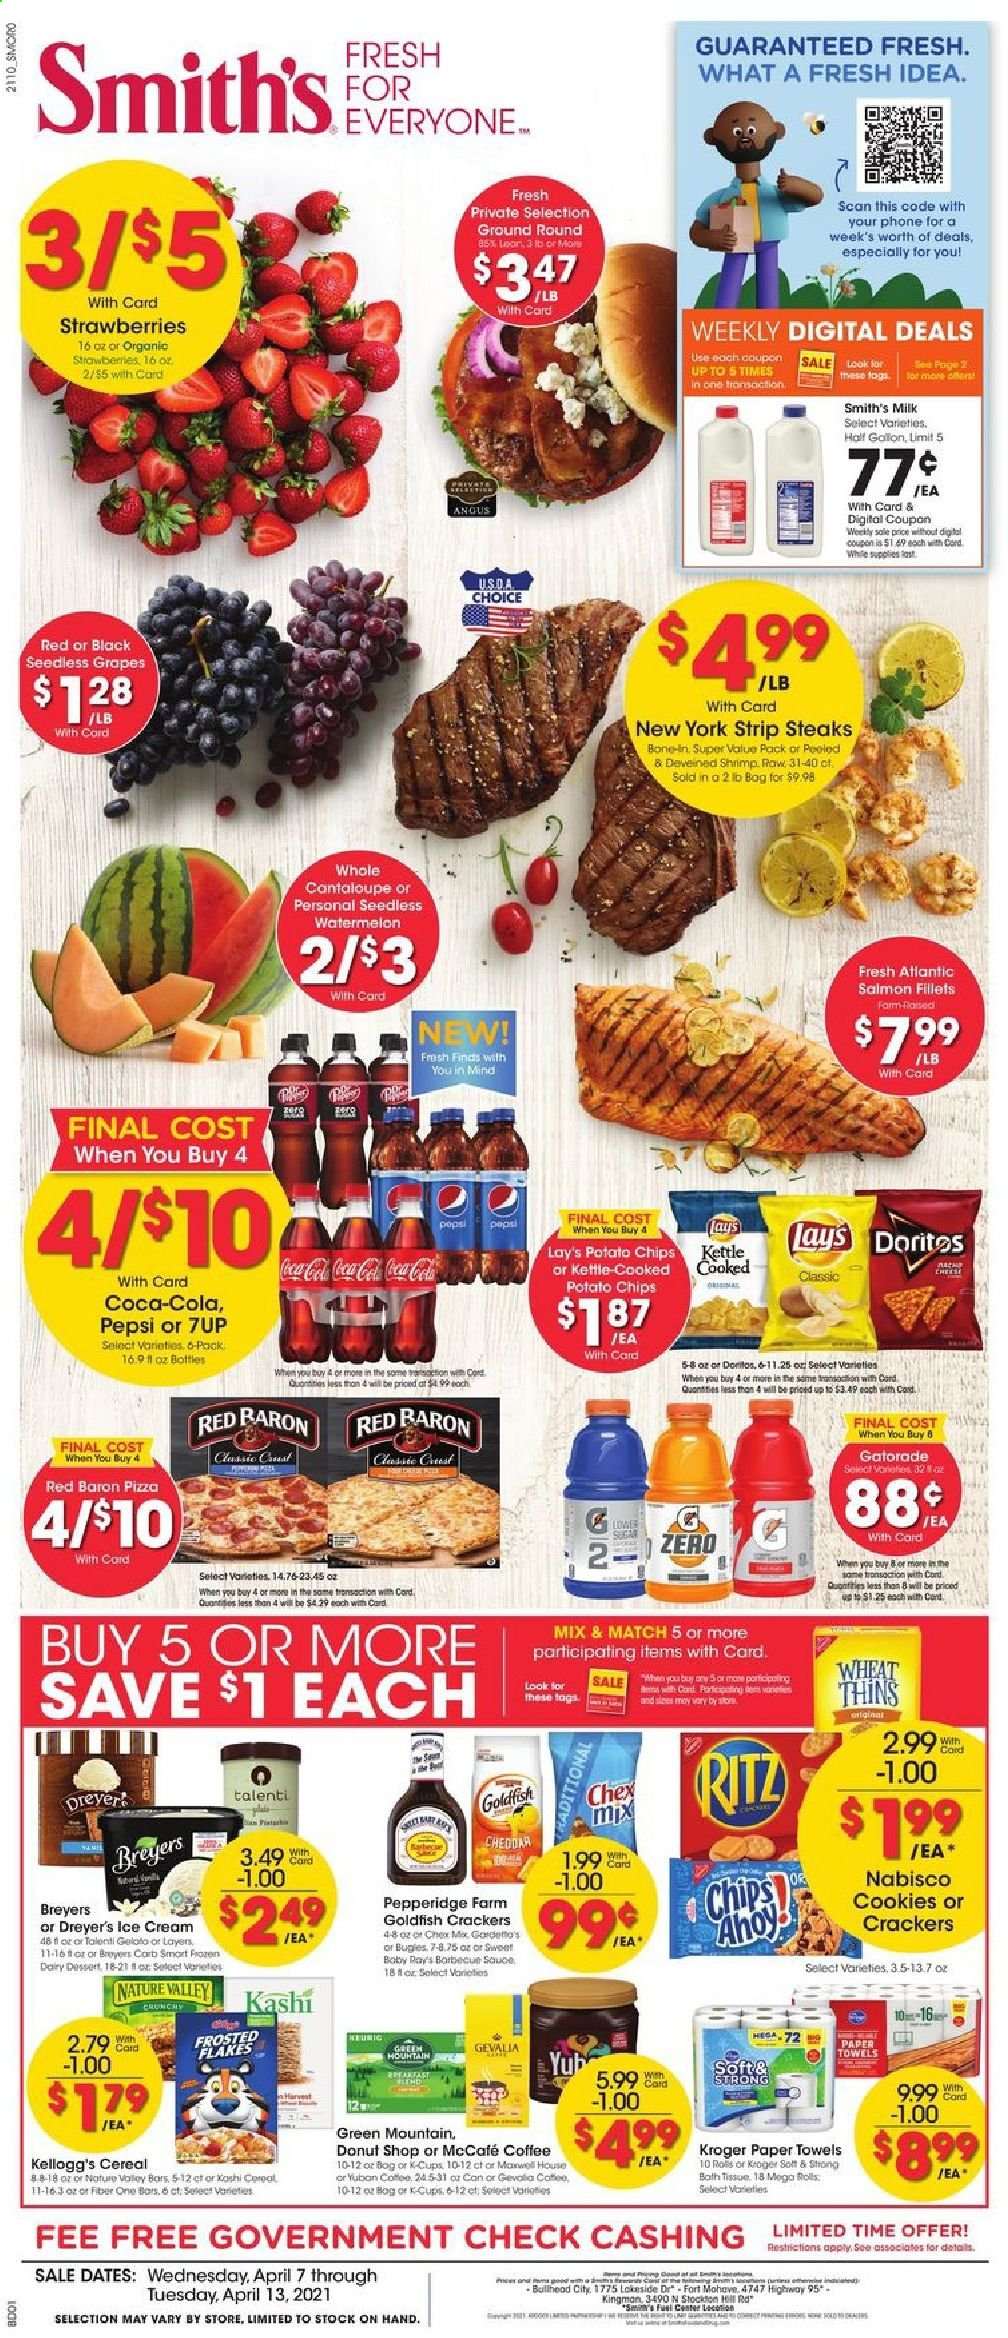 thumbnail - Smith's Flyer - 04/07/2021 - 04/13/2021 - Sales products - seedless grapes, cantaloupe, grapes, strawberries, watermelon, salmon, salmon fillet, pizza, sauce, milk, ice cream, Talenti Gelato, Red Baron, cookies, crackers, Kellogg's, RITZ, Doritos, potato chips, Lay’s, Smith's, Thins, Goldfish, Chex Mix, cereals, Frosted Flakes, Nature Valley, Fiber One, Coca-Cola, Pepsi, 7UP, Gatorade, coffee, coffee capsules, L'Or, McCafe, K-Cups, Gevalia, Green Mountain, beef meat, steak, striploin steak, bath tissue, kitchen towels, paper towels. Page 1.